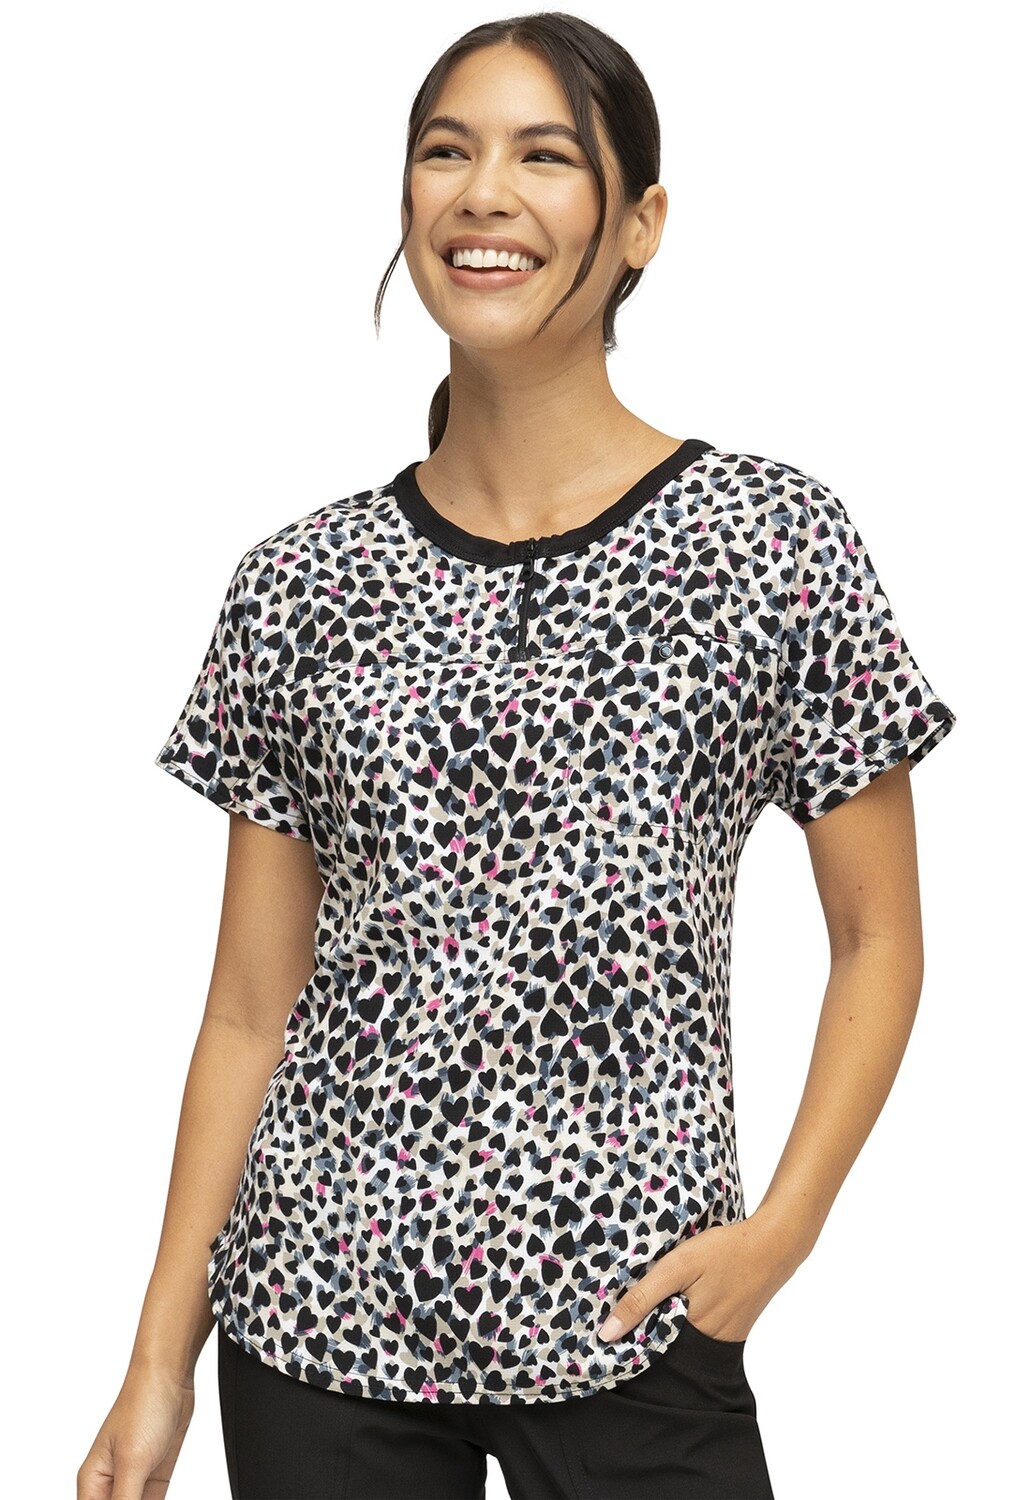 HeartSoul Scrubs Prints Round Neck Tuck-in Top